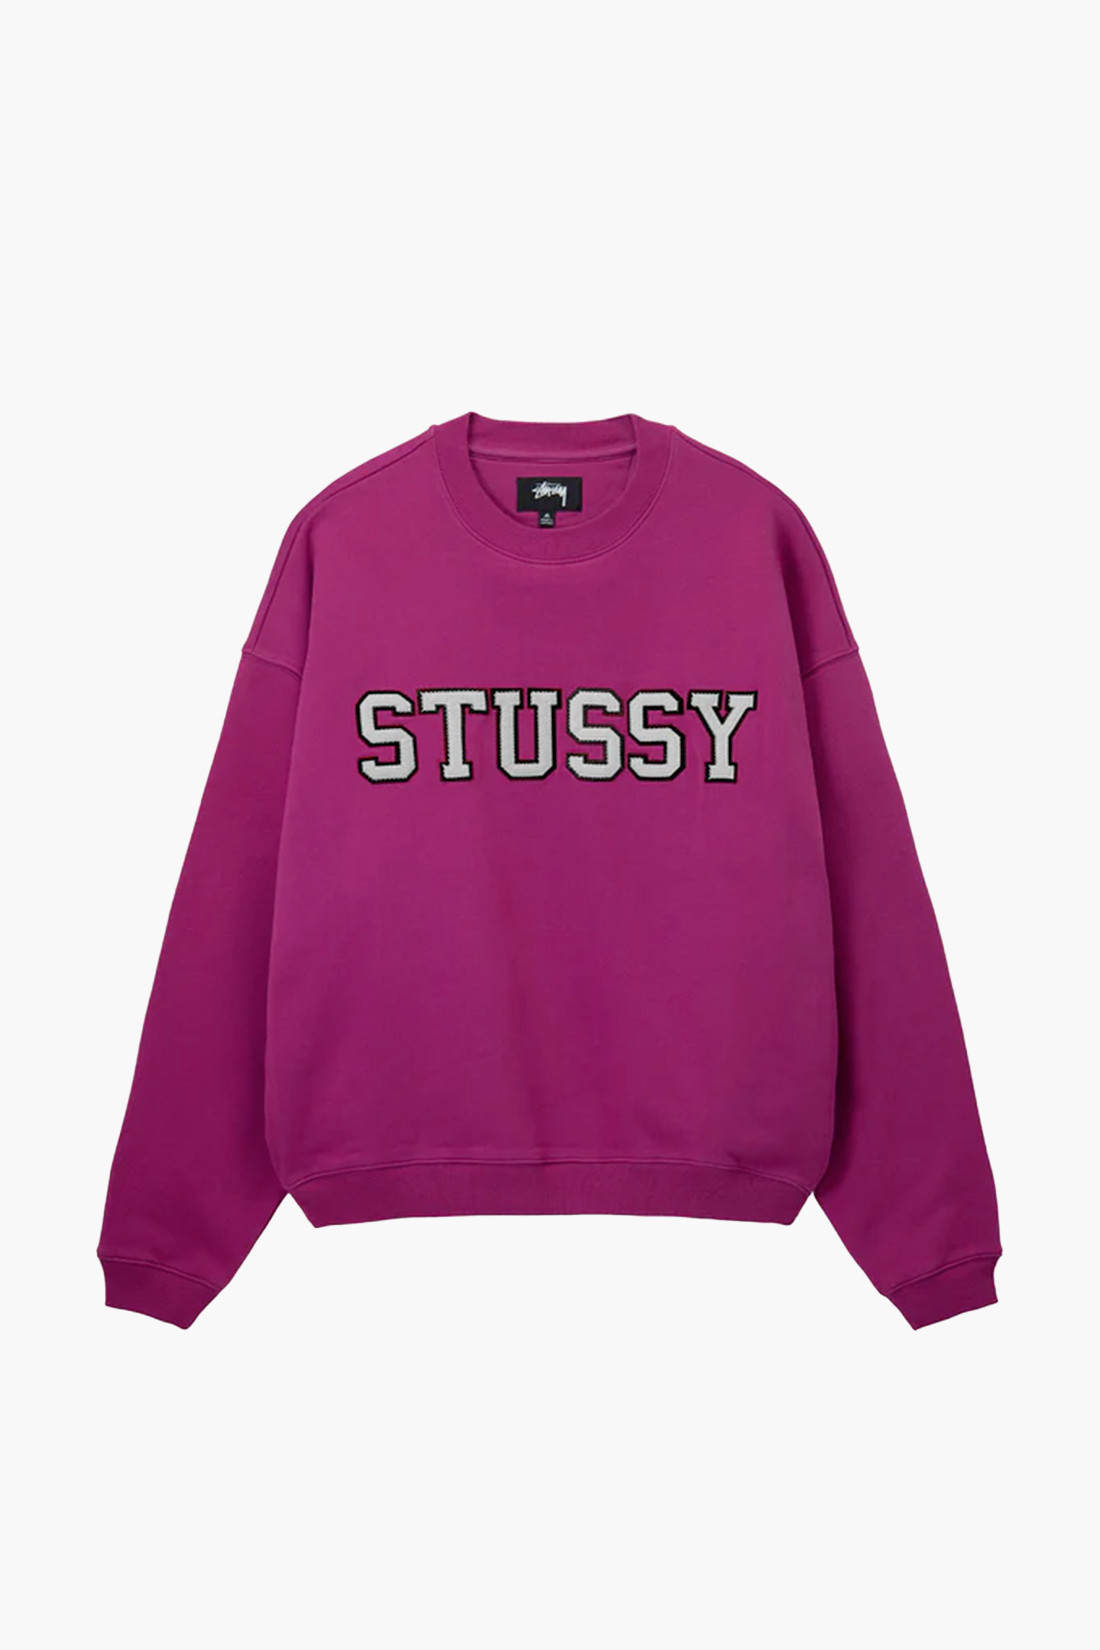 STUSSY - Streetwear Clothing and Accessories, FW22 Collection ...